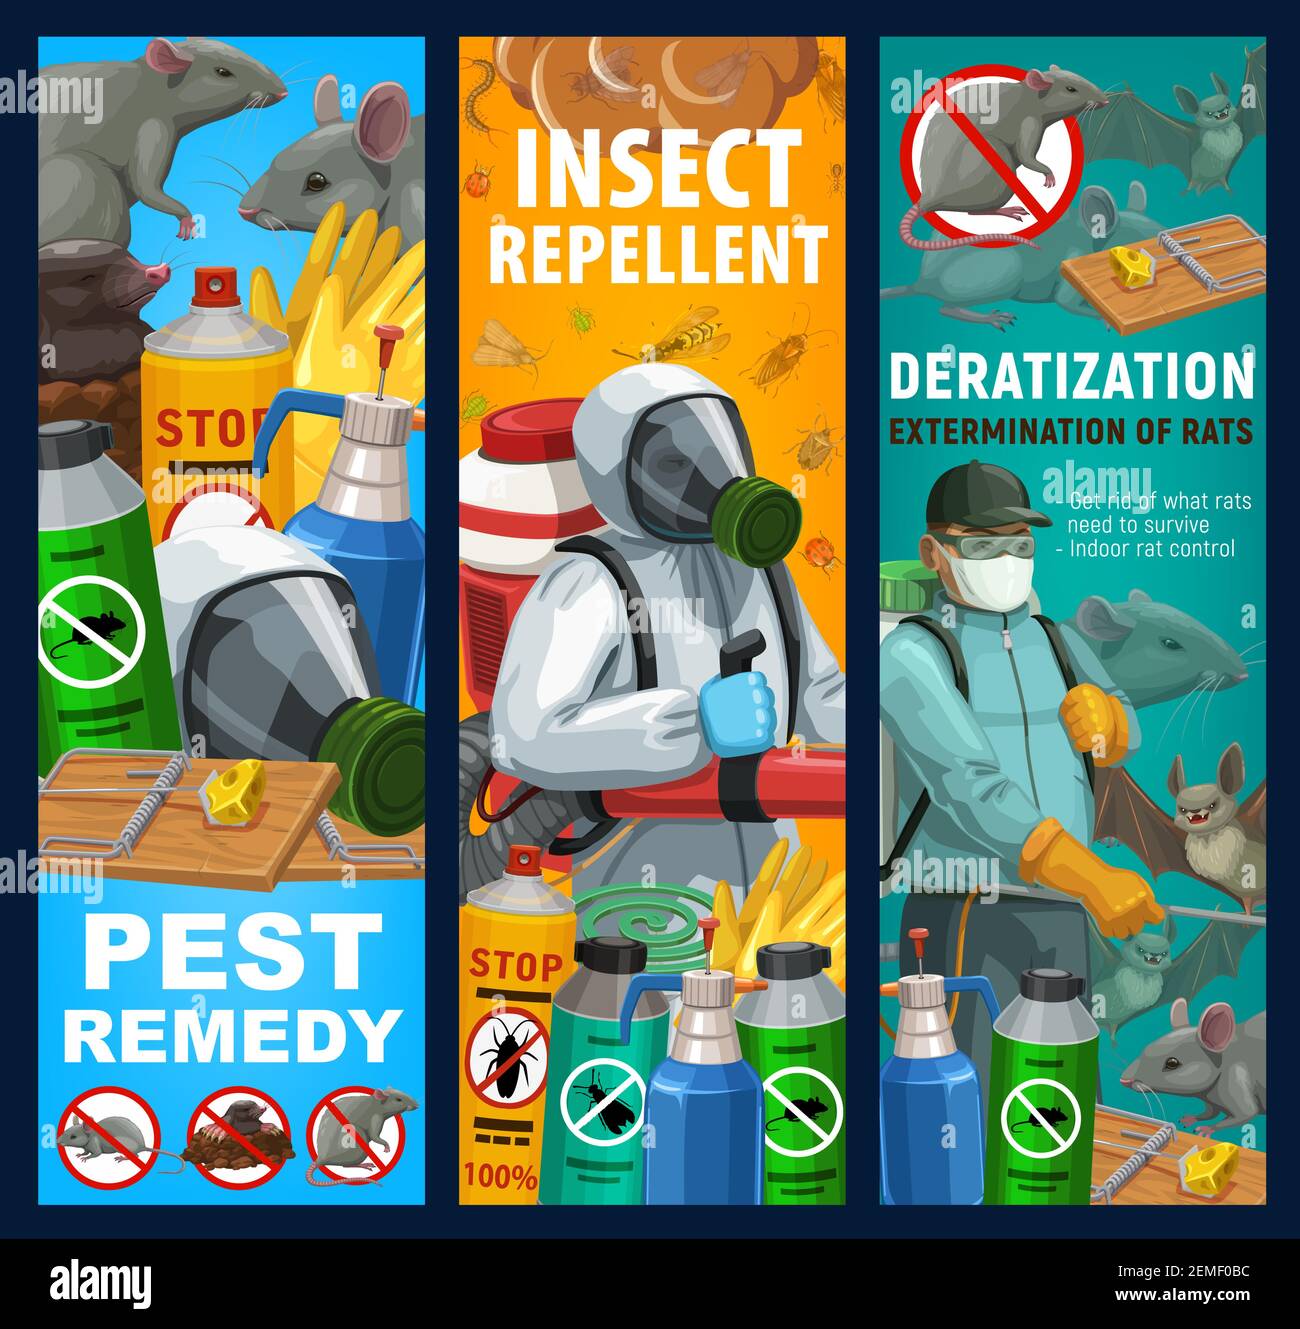 Pest control sanitary service vector banners. Disinfestation and deratization with insecticides, domestic disinfection and fumigation of bugs, rodents Stock Vector